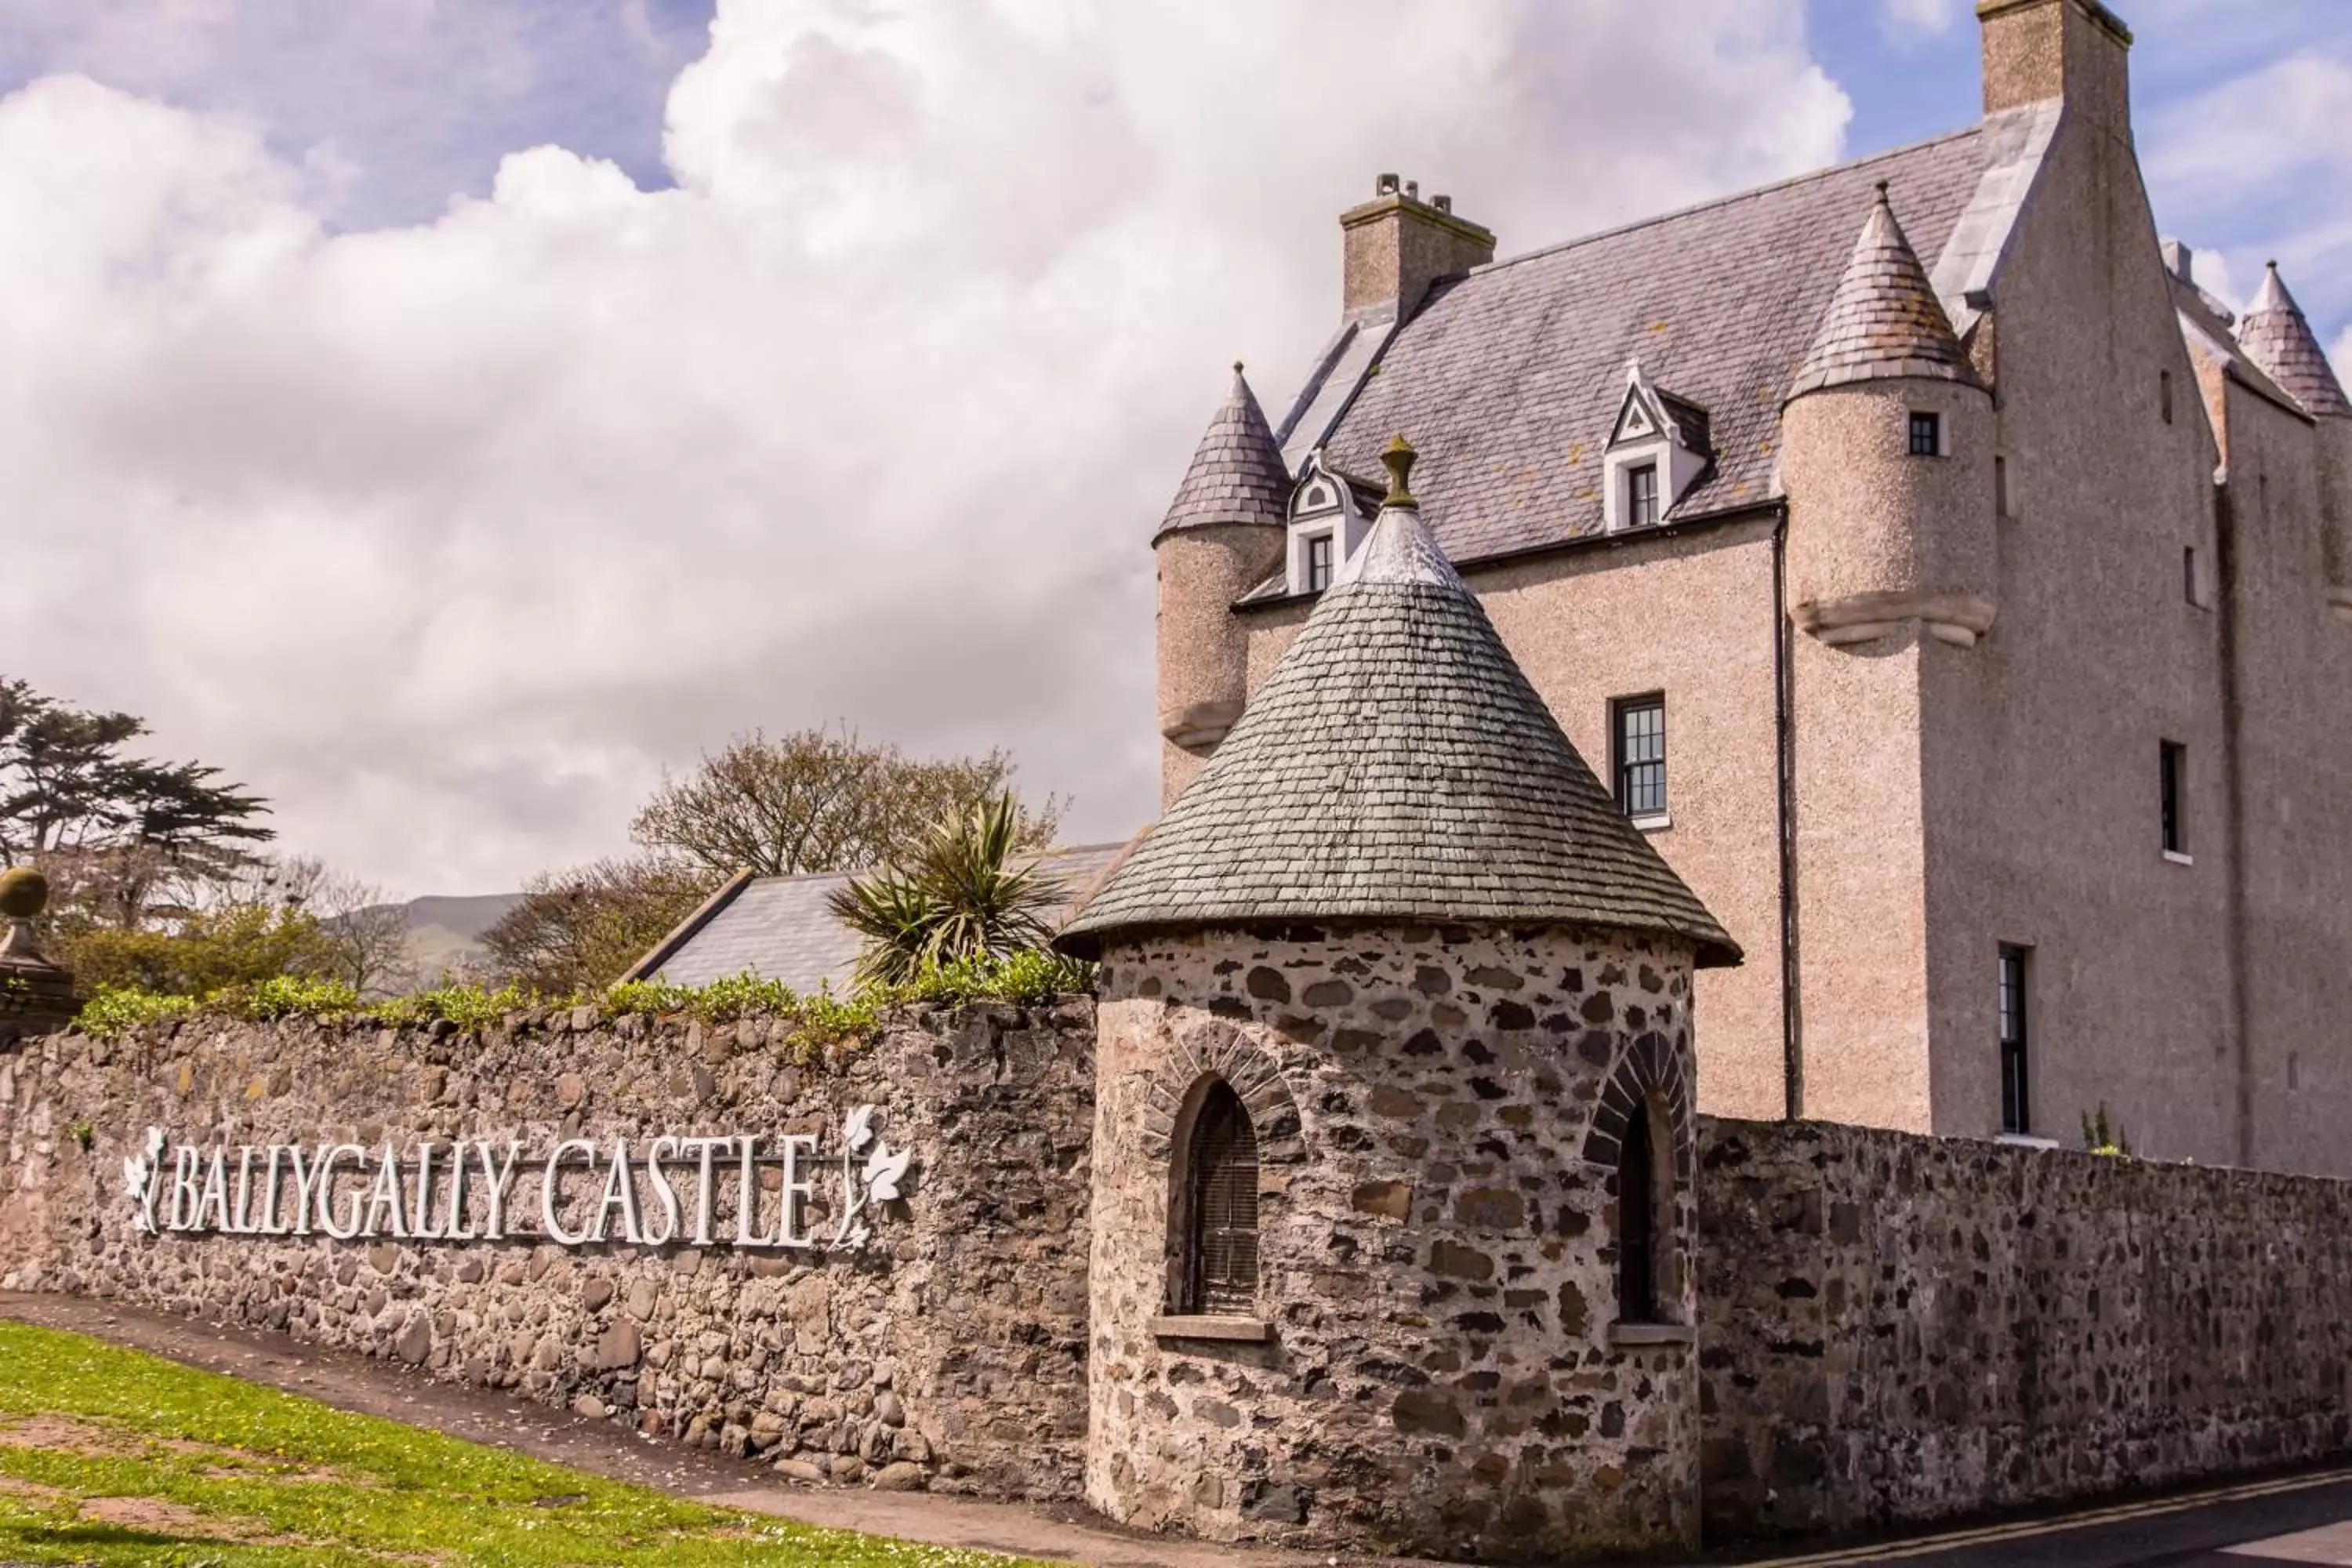 Property Building in Ballygally Castle